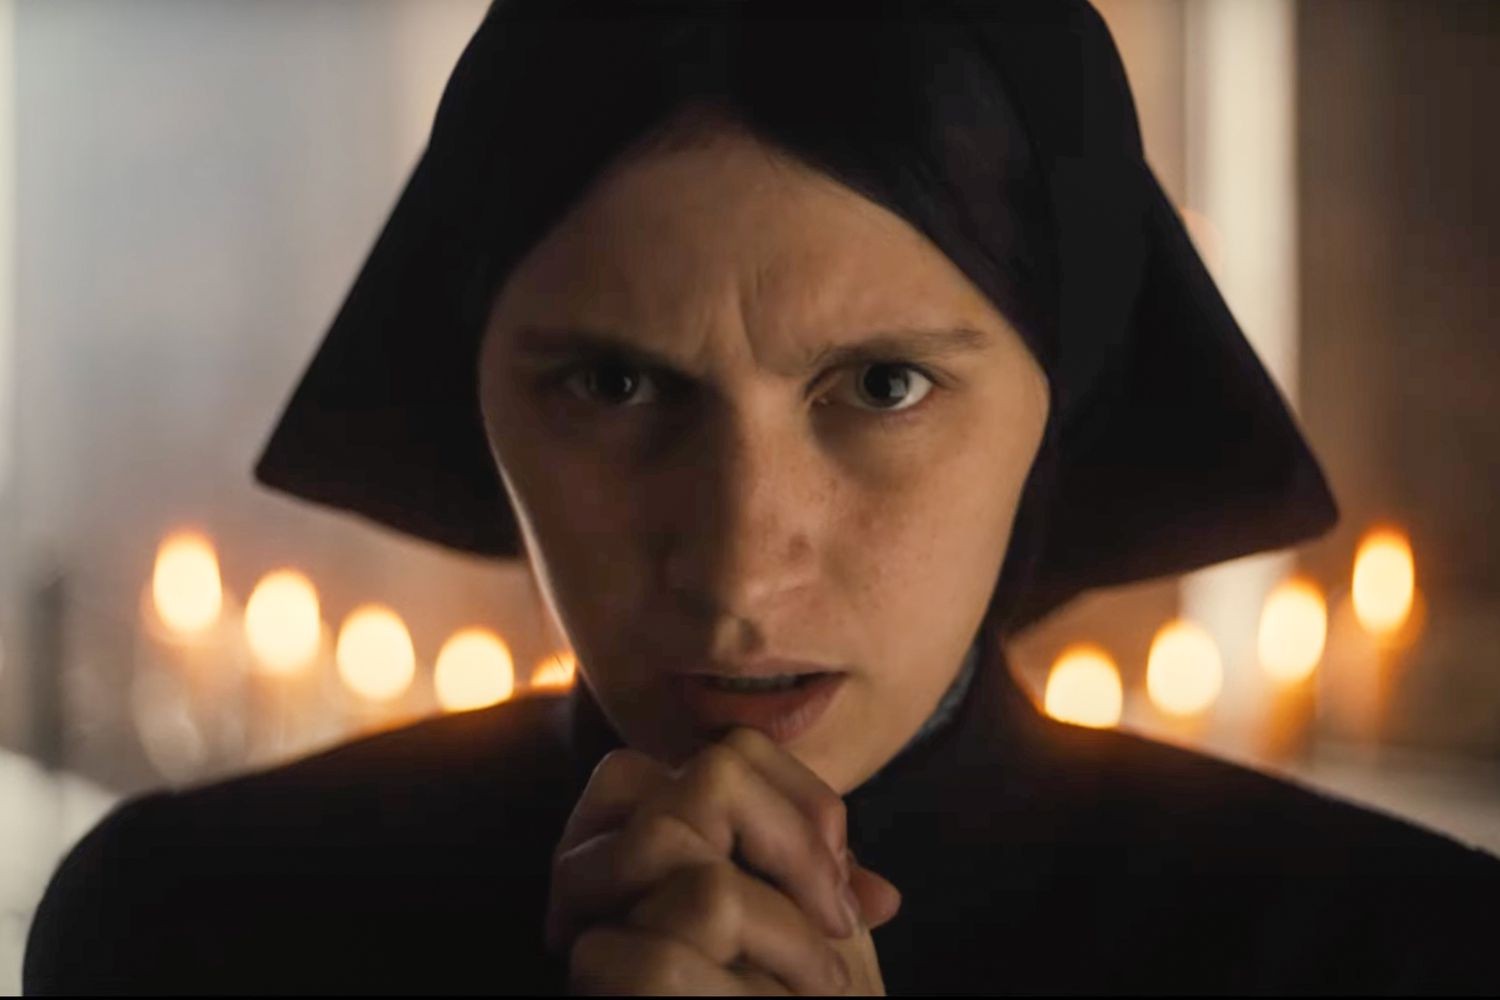 Both Immaculate and The First Omen feature nuns under terrifying circumstances